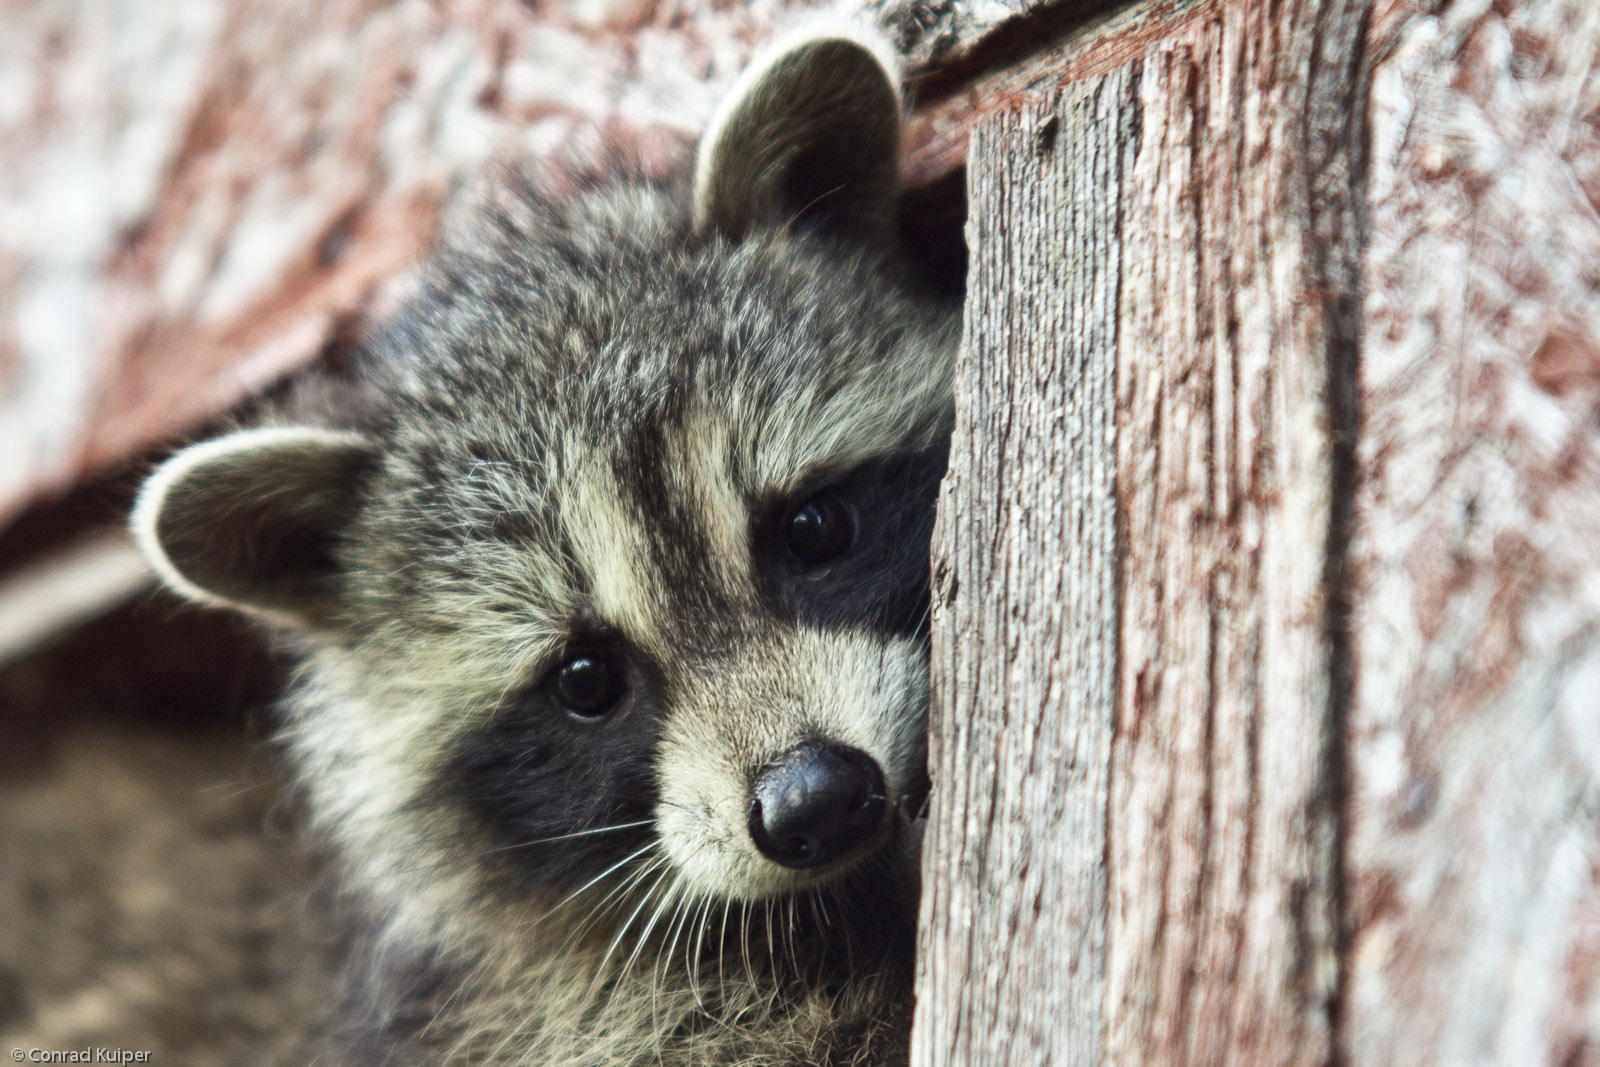 How to Get Raccoons and Other Animals Out of Your Attic